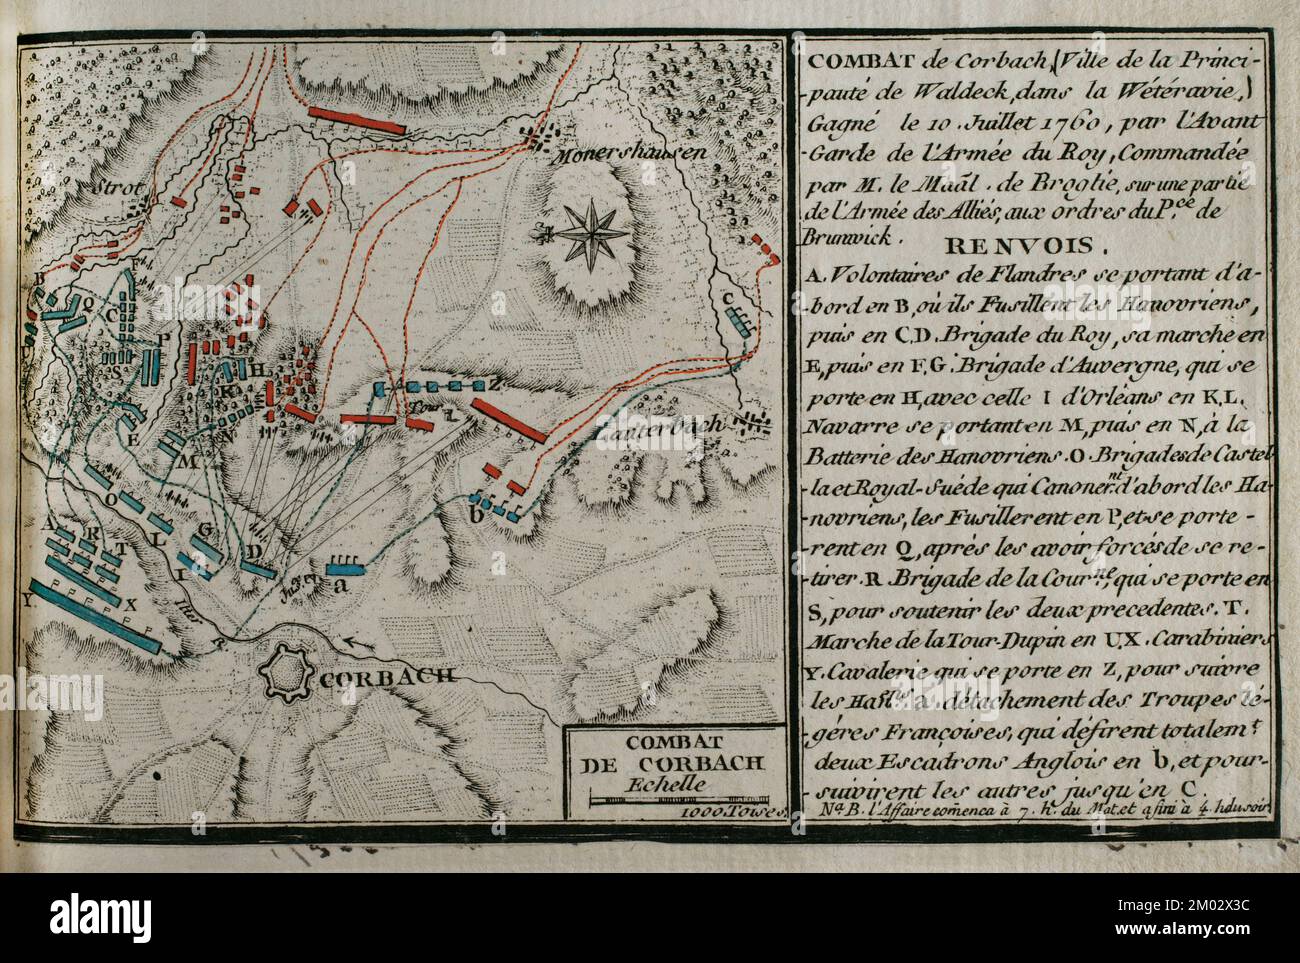 Seven Years War (1756-1763). Map of the Battle of Corbach or Korbach (July 10, 1760). Northern Hesse, Germany. The French troops, led by Marshal Victor-François, 2nd Duke of Broglie, defeated the Hanoverians, British and Hessian allies, commanded by Ferdinand, Duke of Brunswick. Published in 1765 by the cartographer Jean de Beaurain (1696-1771) as an illustration of his Great Map of Germany, with the events that took place during the Seven Years War. Allied army in red and the French army in blue. Etching and engraving. French edition, 1765. Military Historical Library of Barcelona (Biblioteca Stock Photo